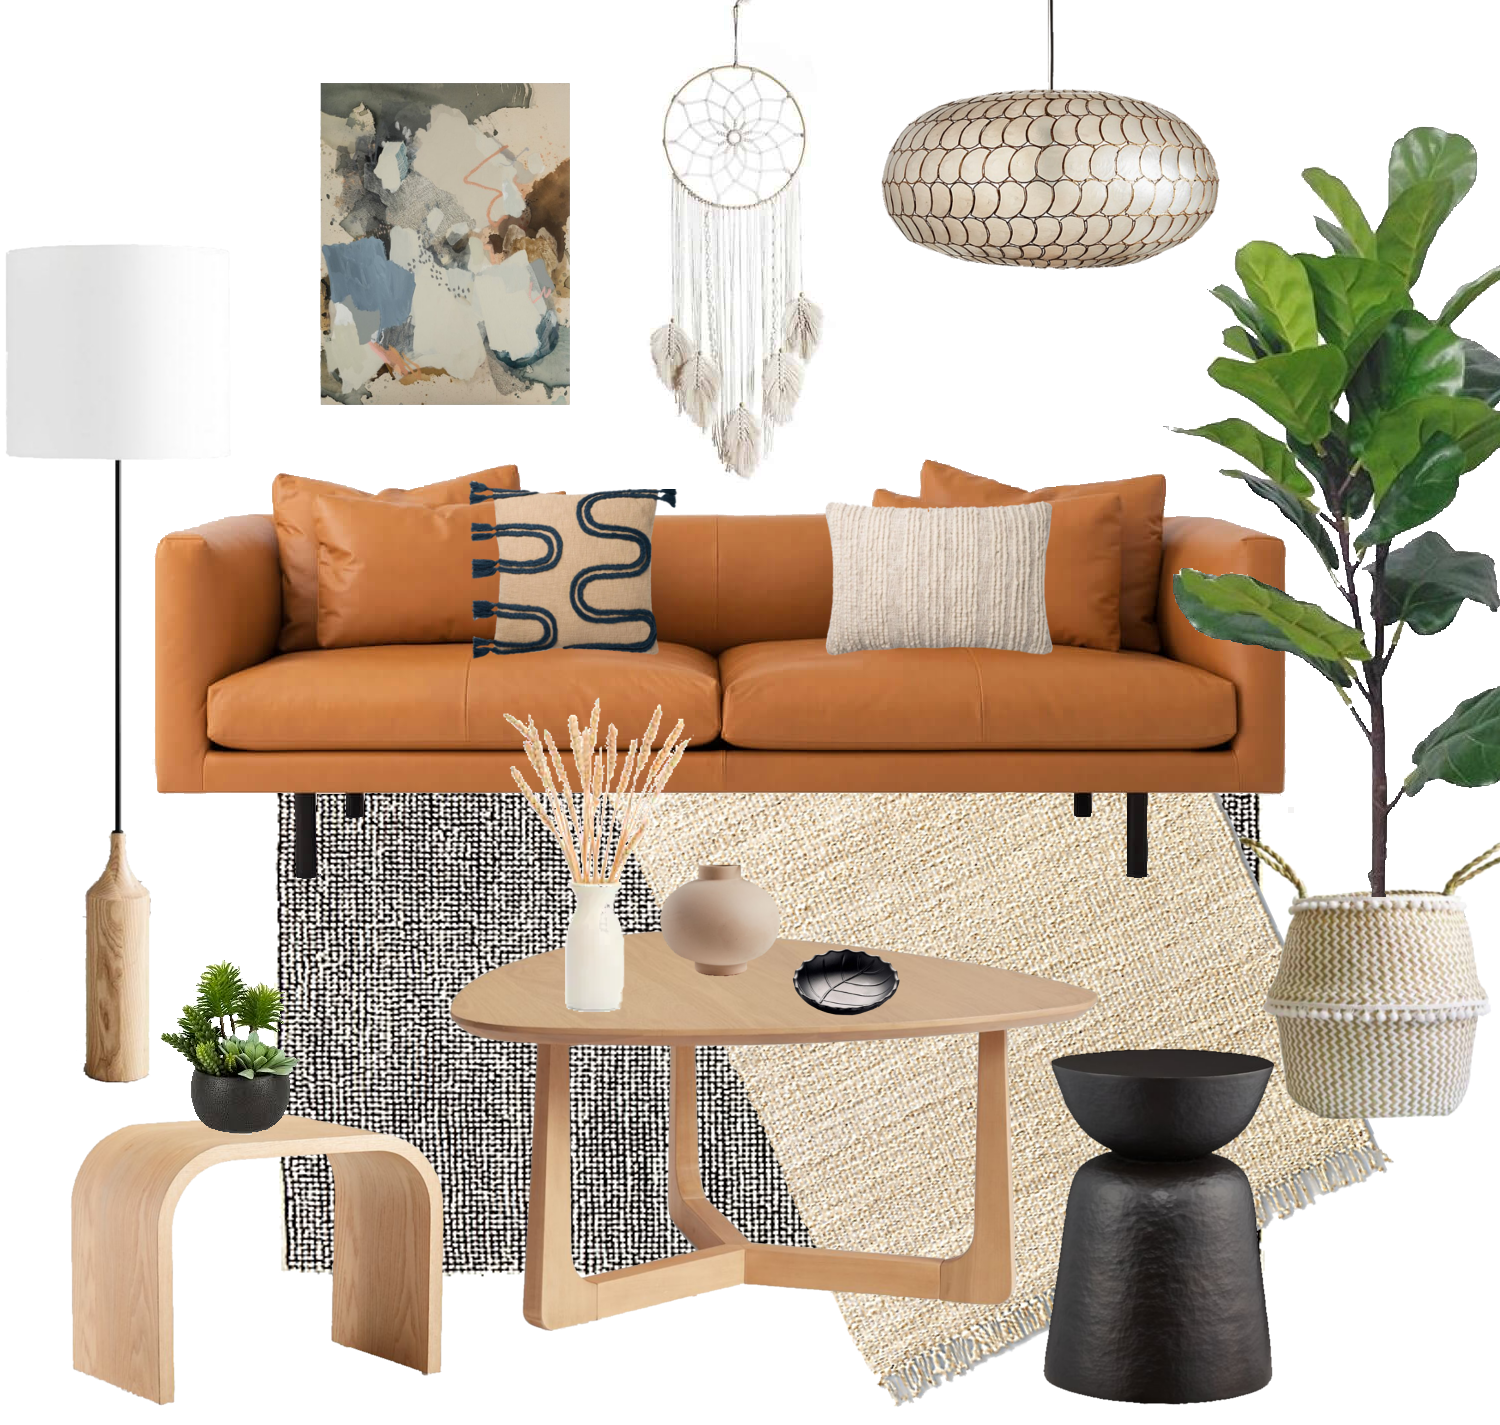 Urban Chic Living Room By Sarah Marie